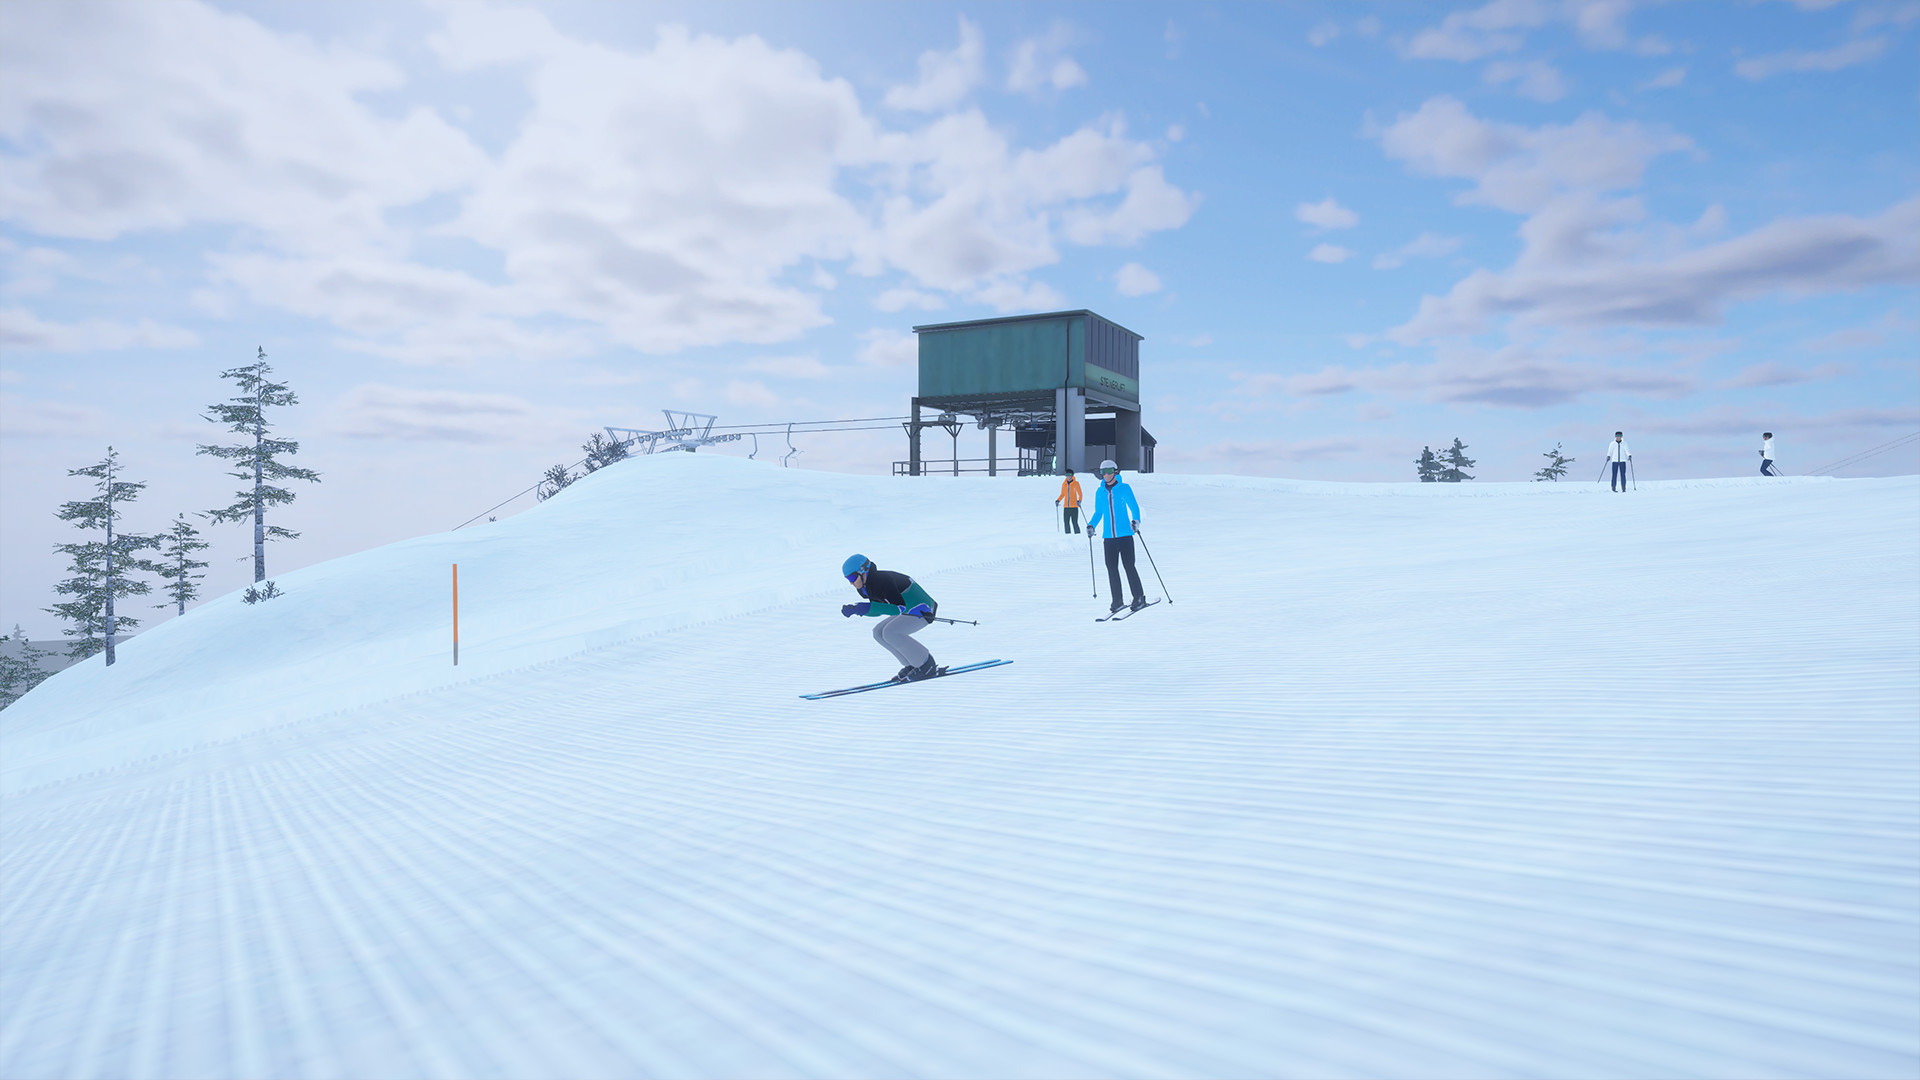 Alpine - The Simulation Game Free Download